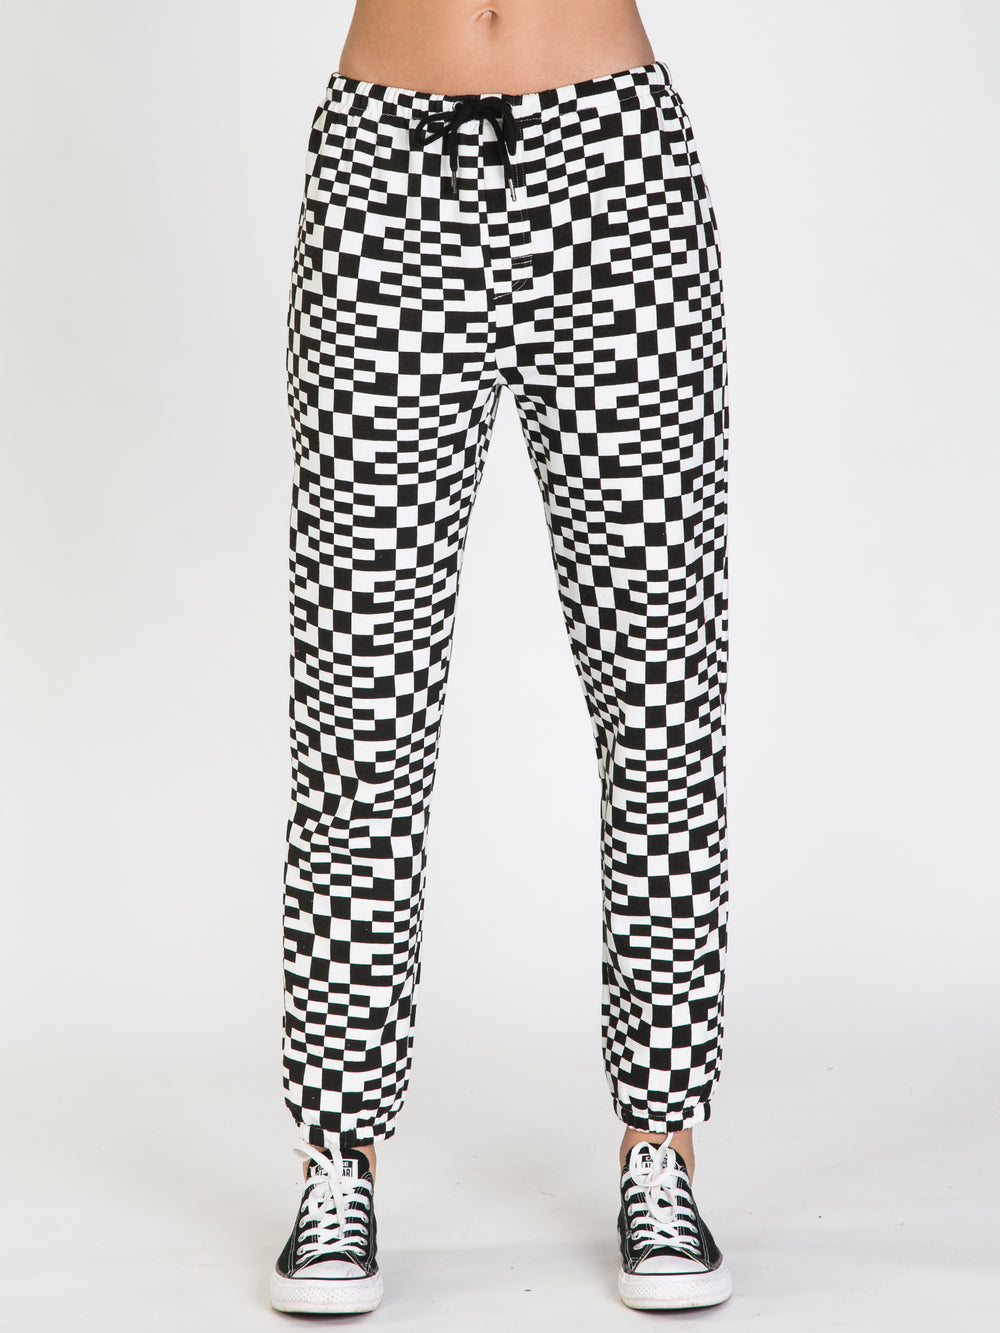 VOLCOM CHECK U OUT SWEATPANT - CHECK - CLEARANCE